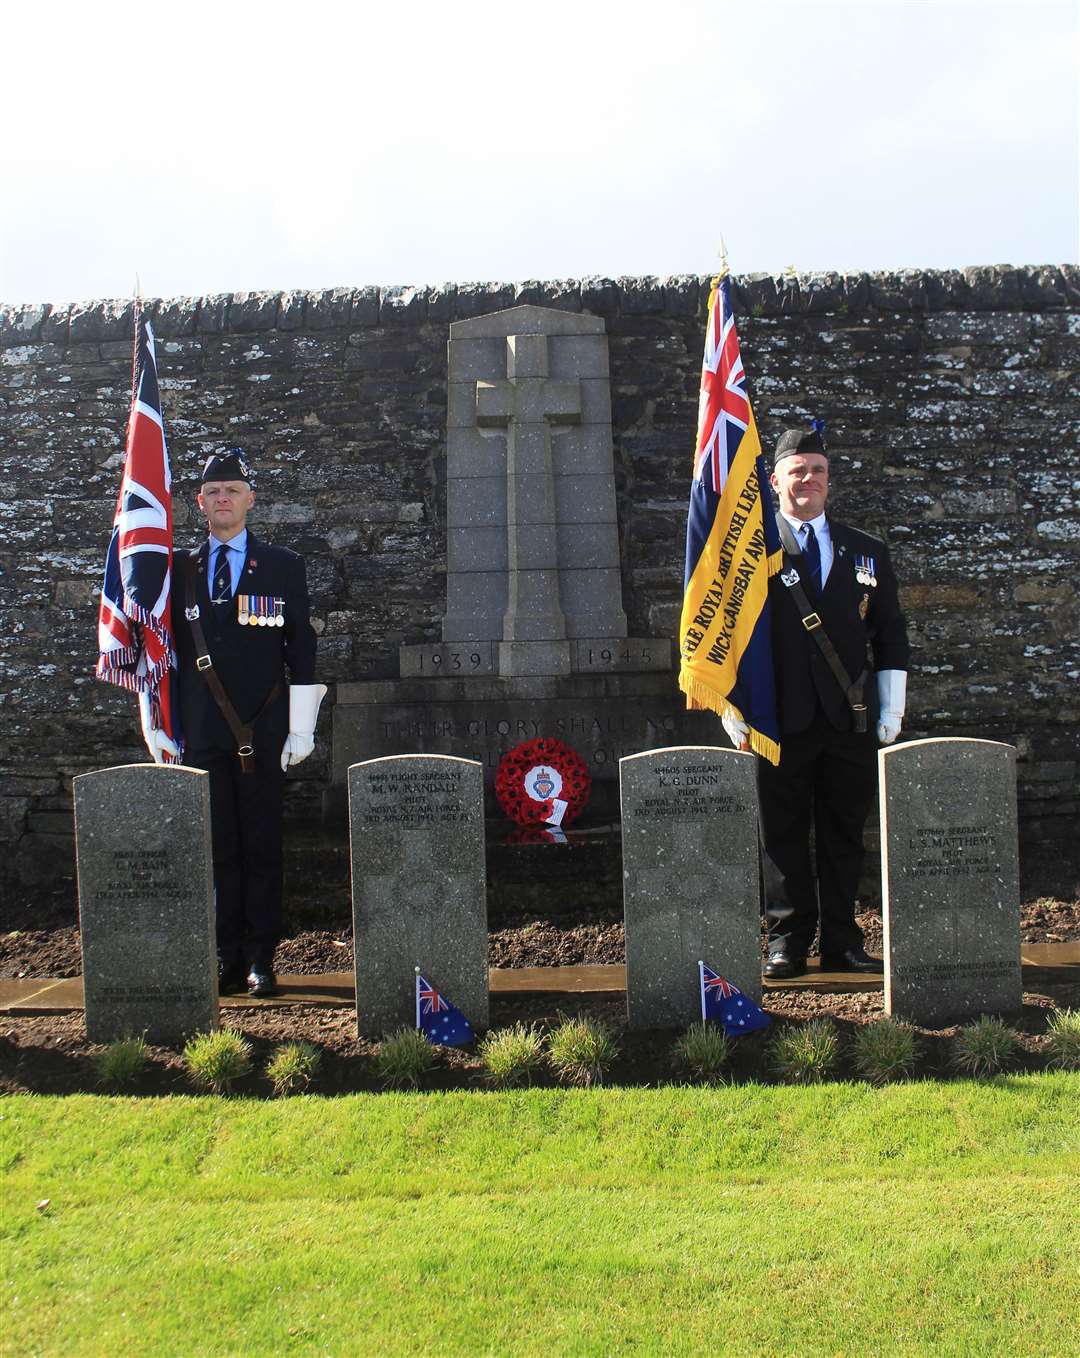 Standard-bearers Angus Mackay (left) and Kev Stewart from the Wick, Canisbay and Latheron branch of the Royal British Legion Scotland. Picture: Alan Hendry